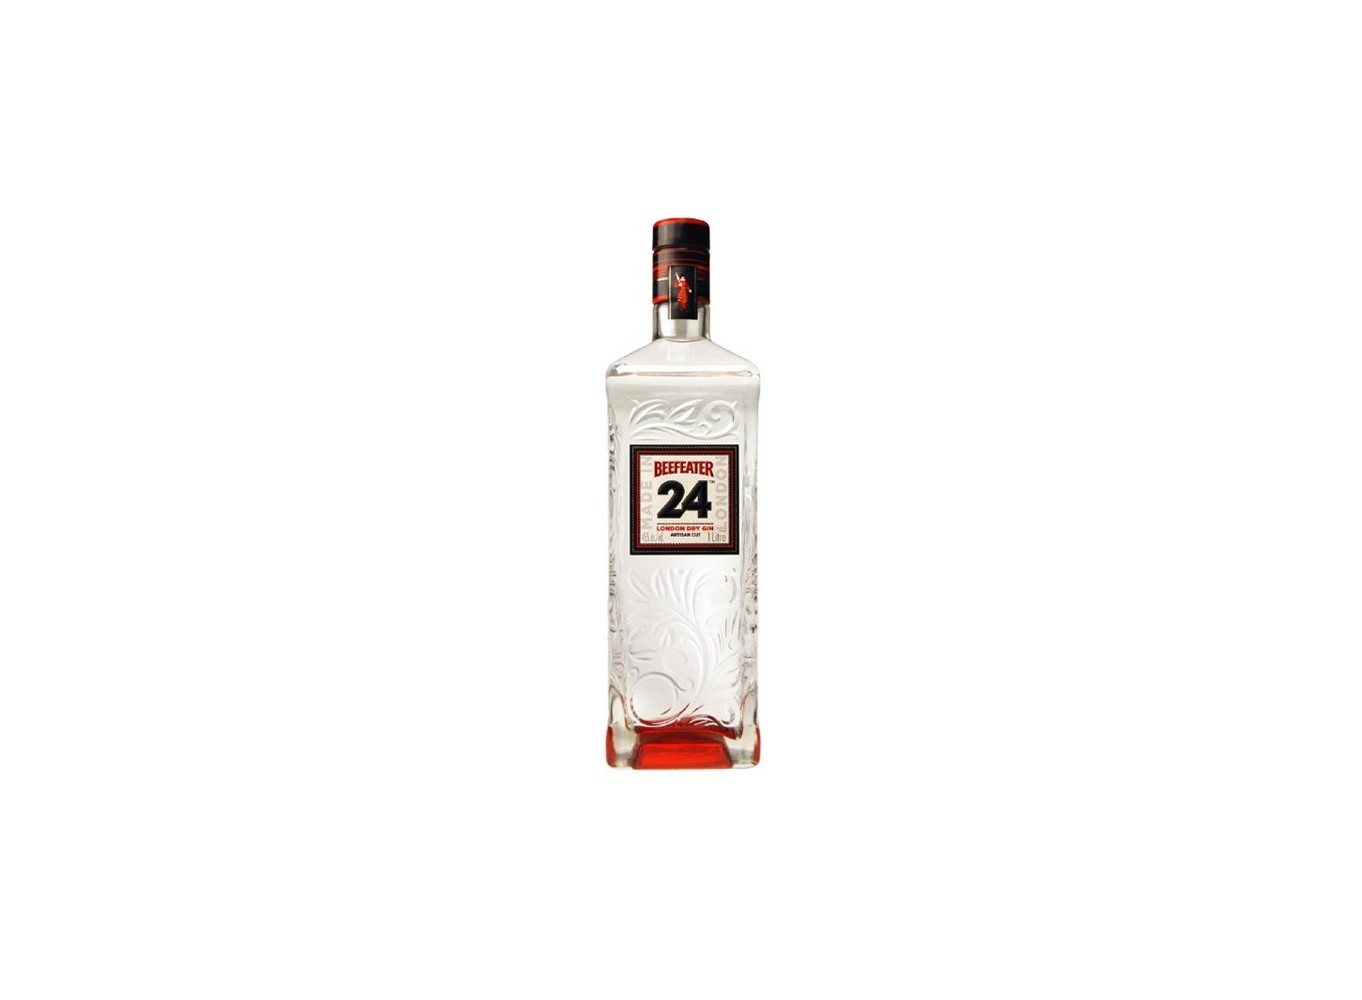 Gin Beefeater 24 